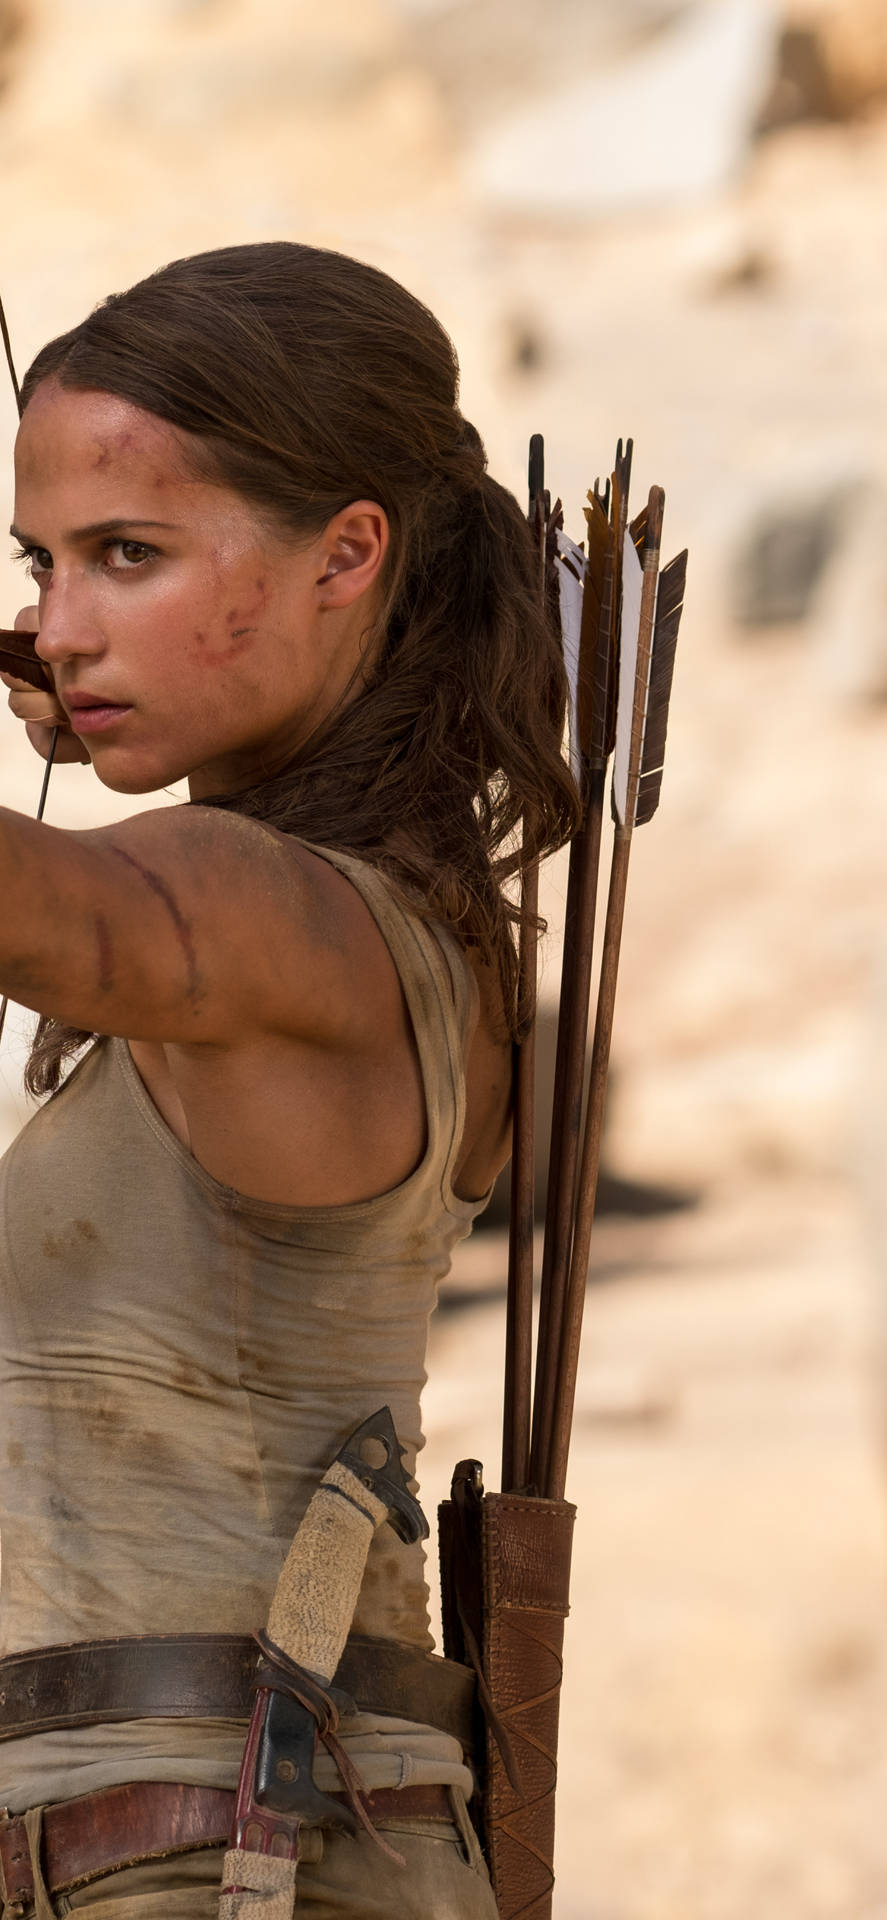 Embrace your inner adventurer with the iconic Lara Croft iPhone. Wallpaper